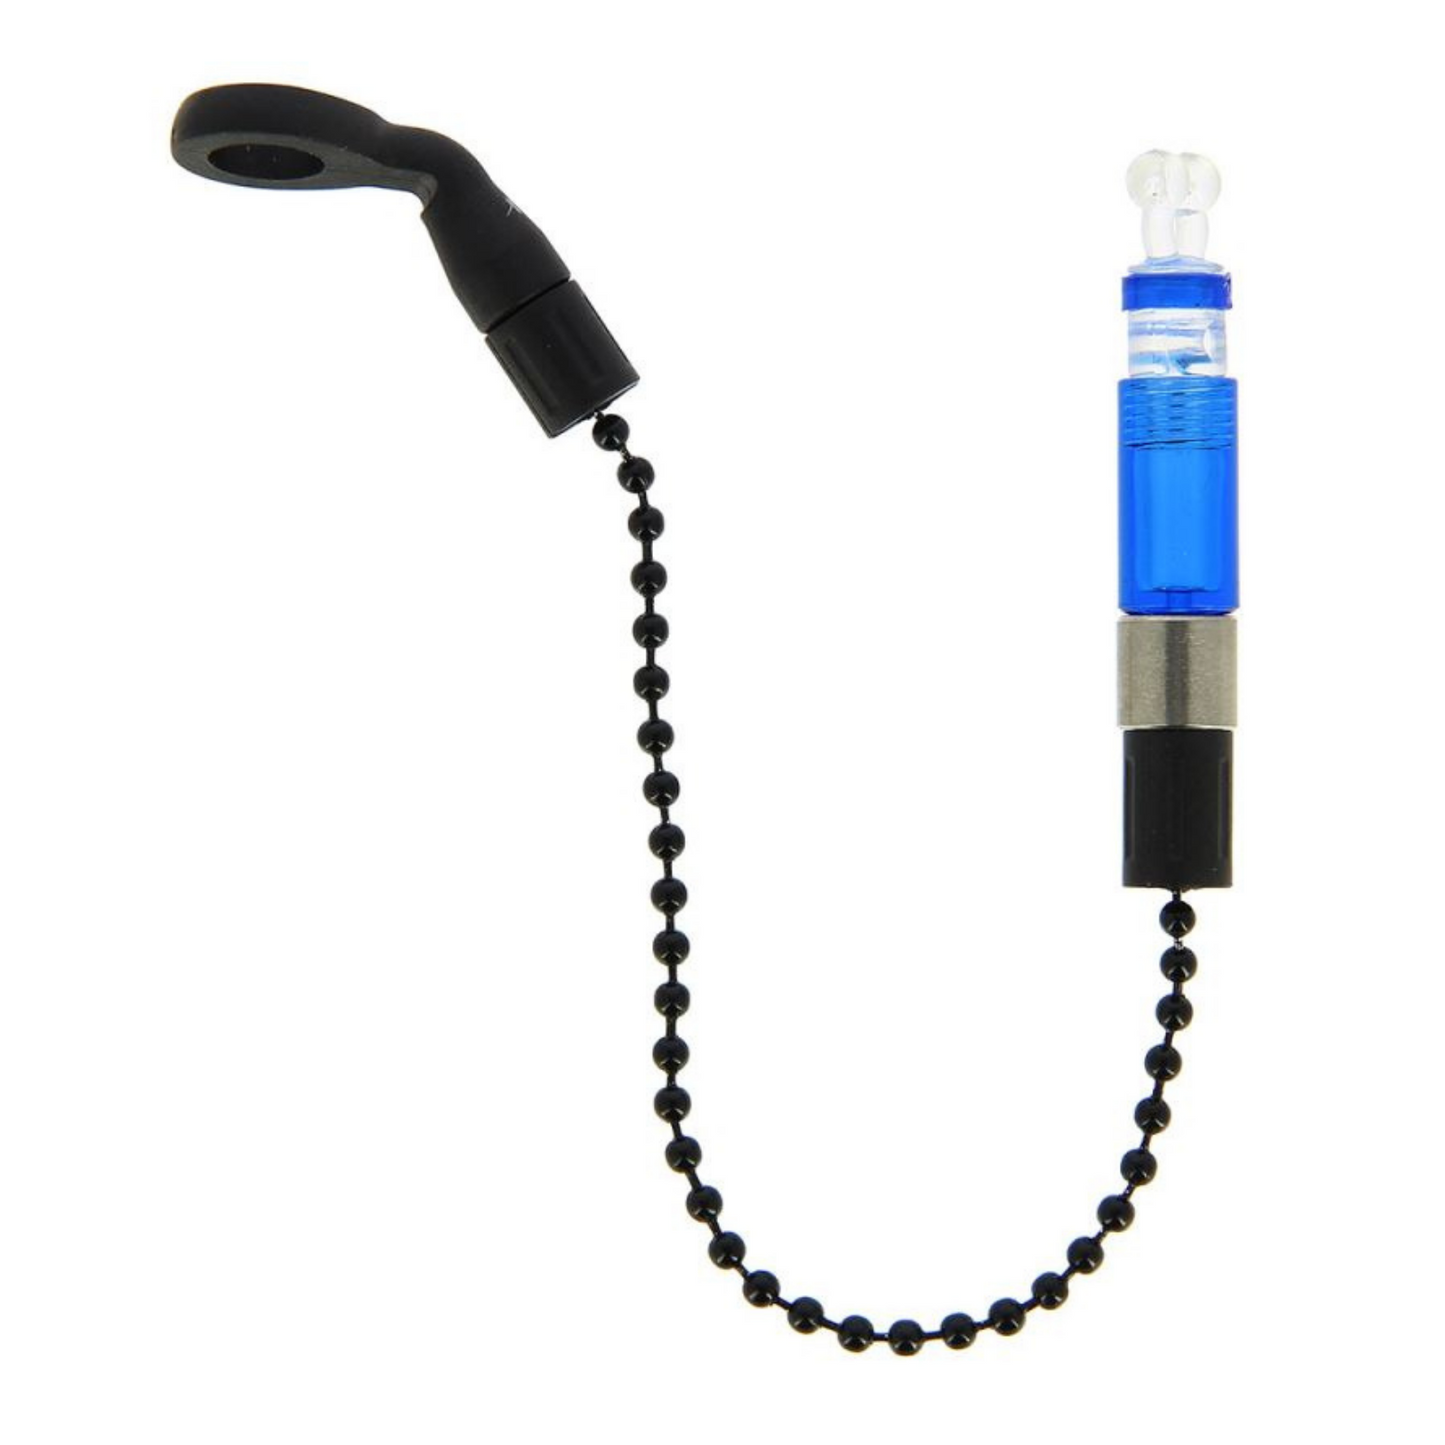 NGT Profiler Indicator - Ball Clip Head with Black Chain and Adjustable Weight.